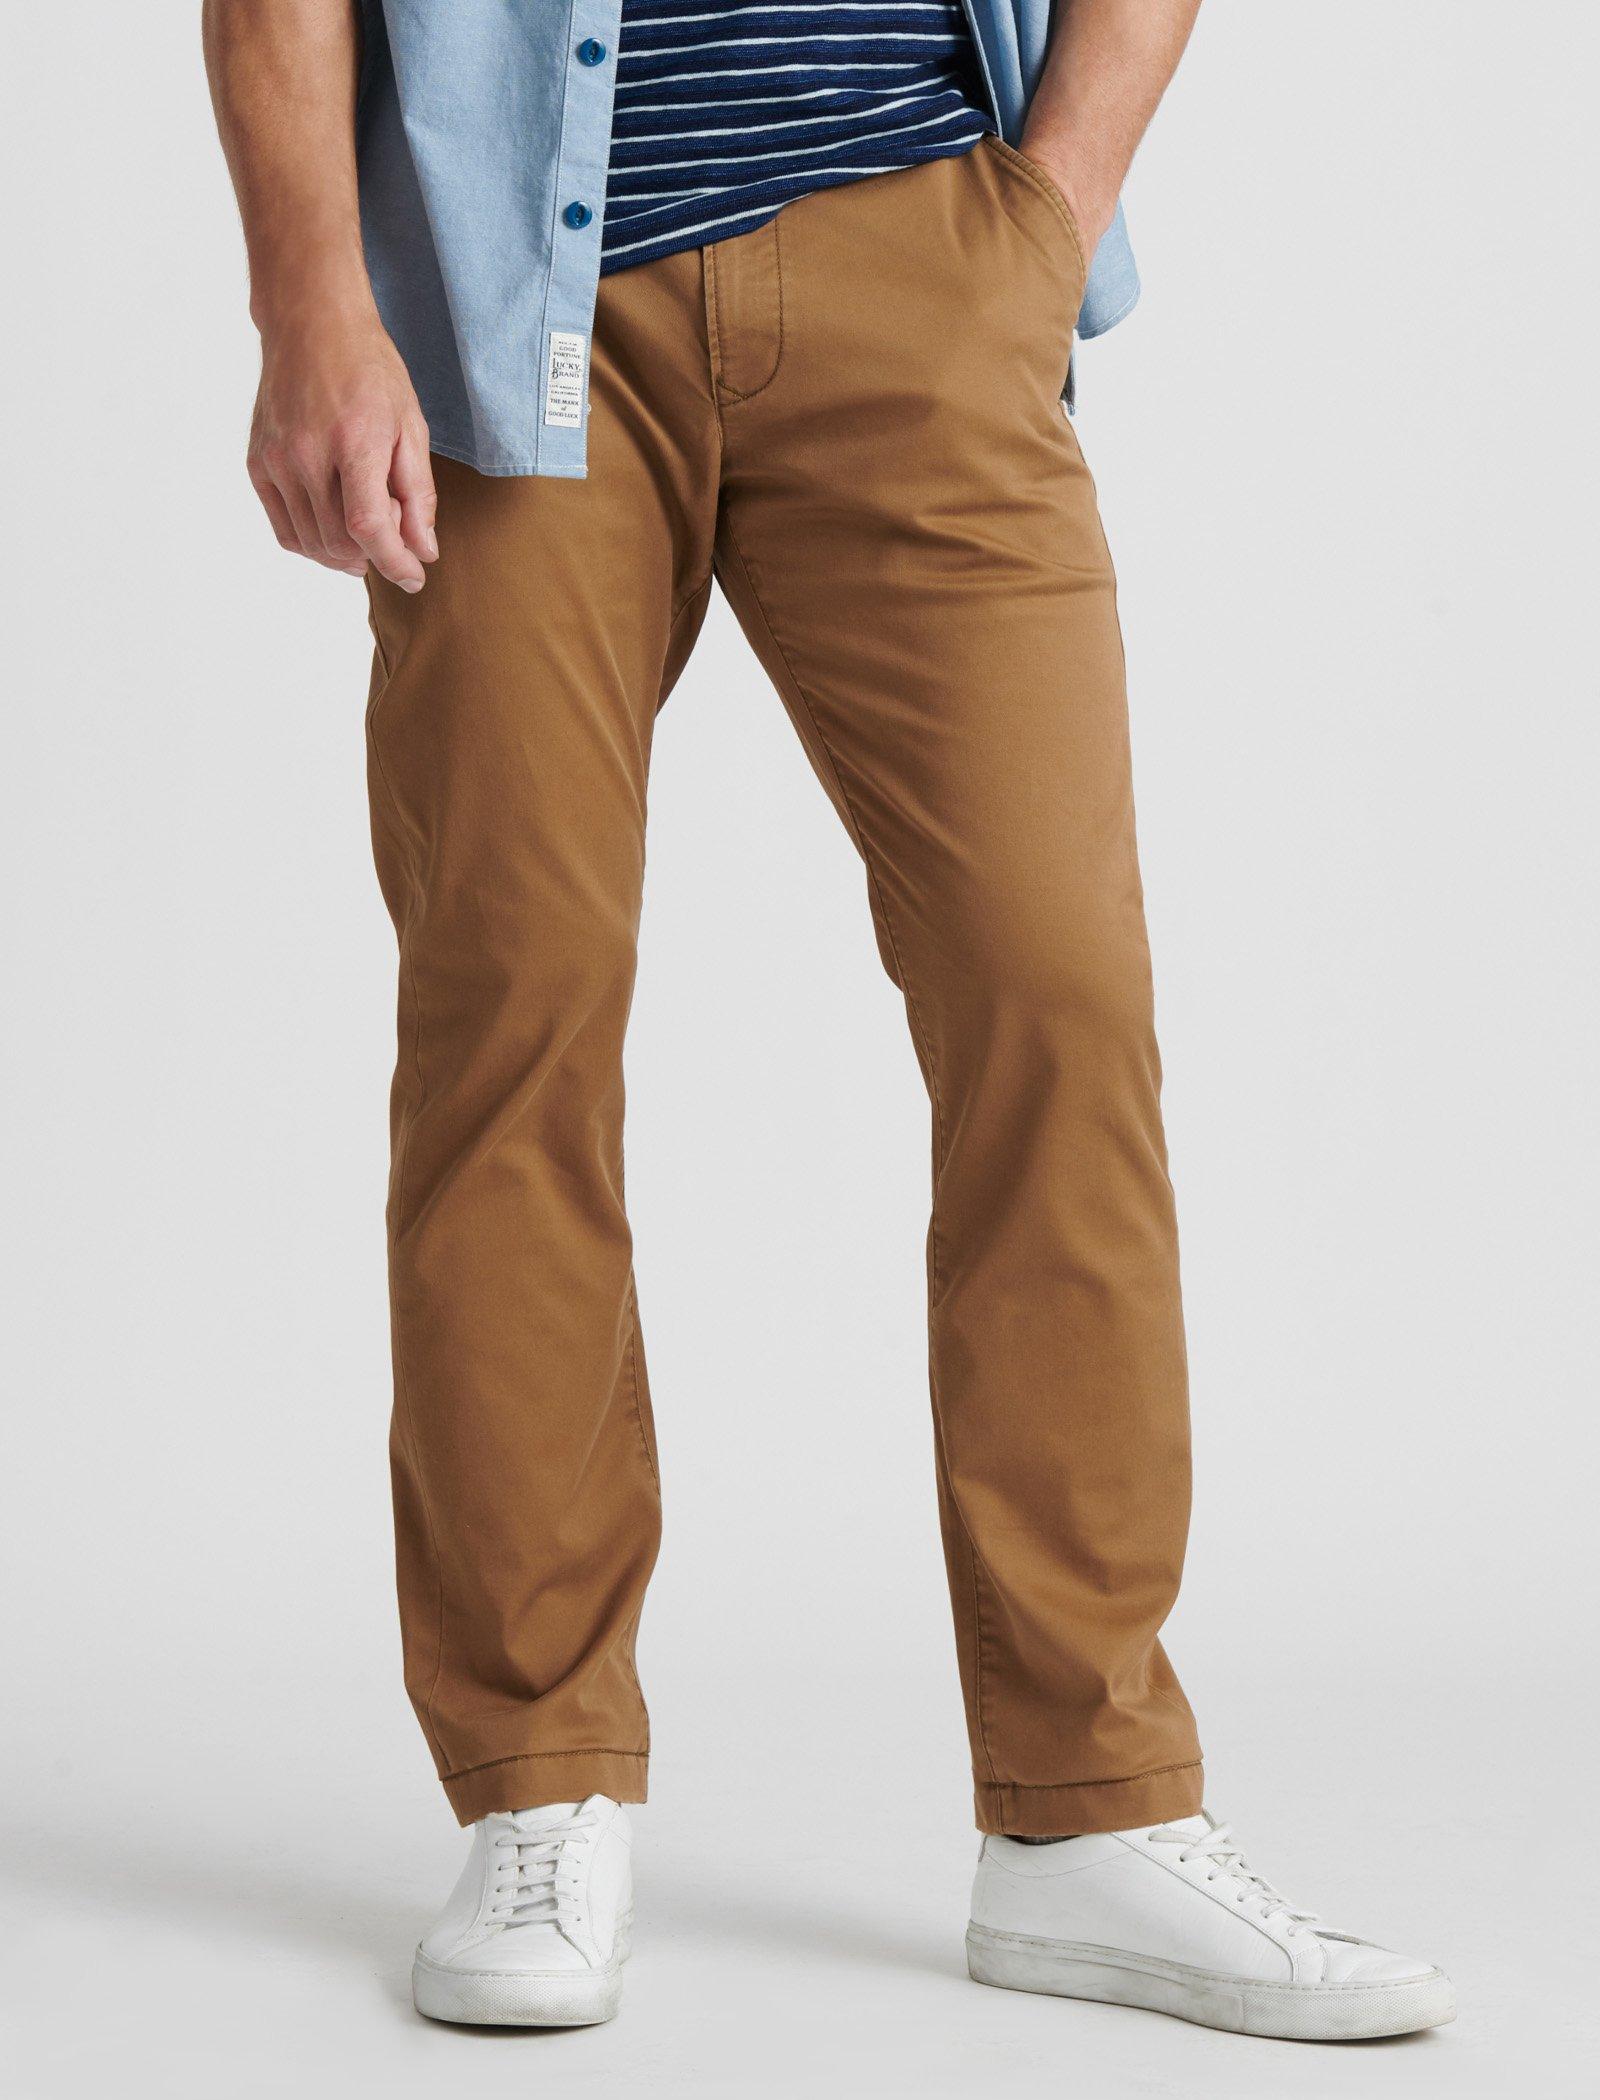 lucky mens pants